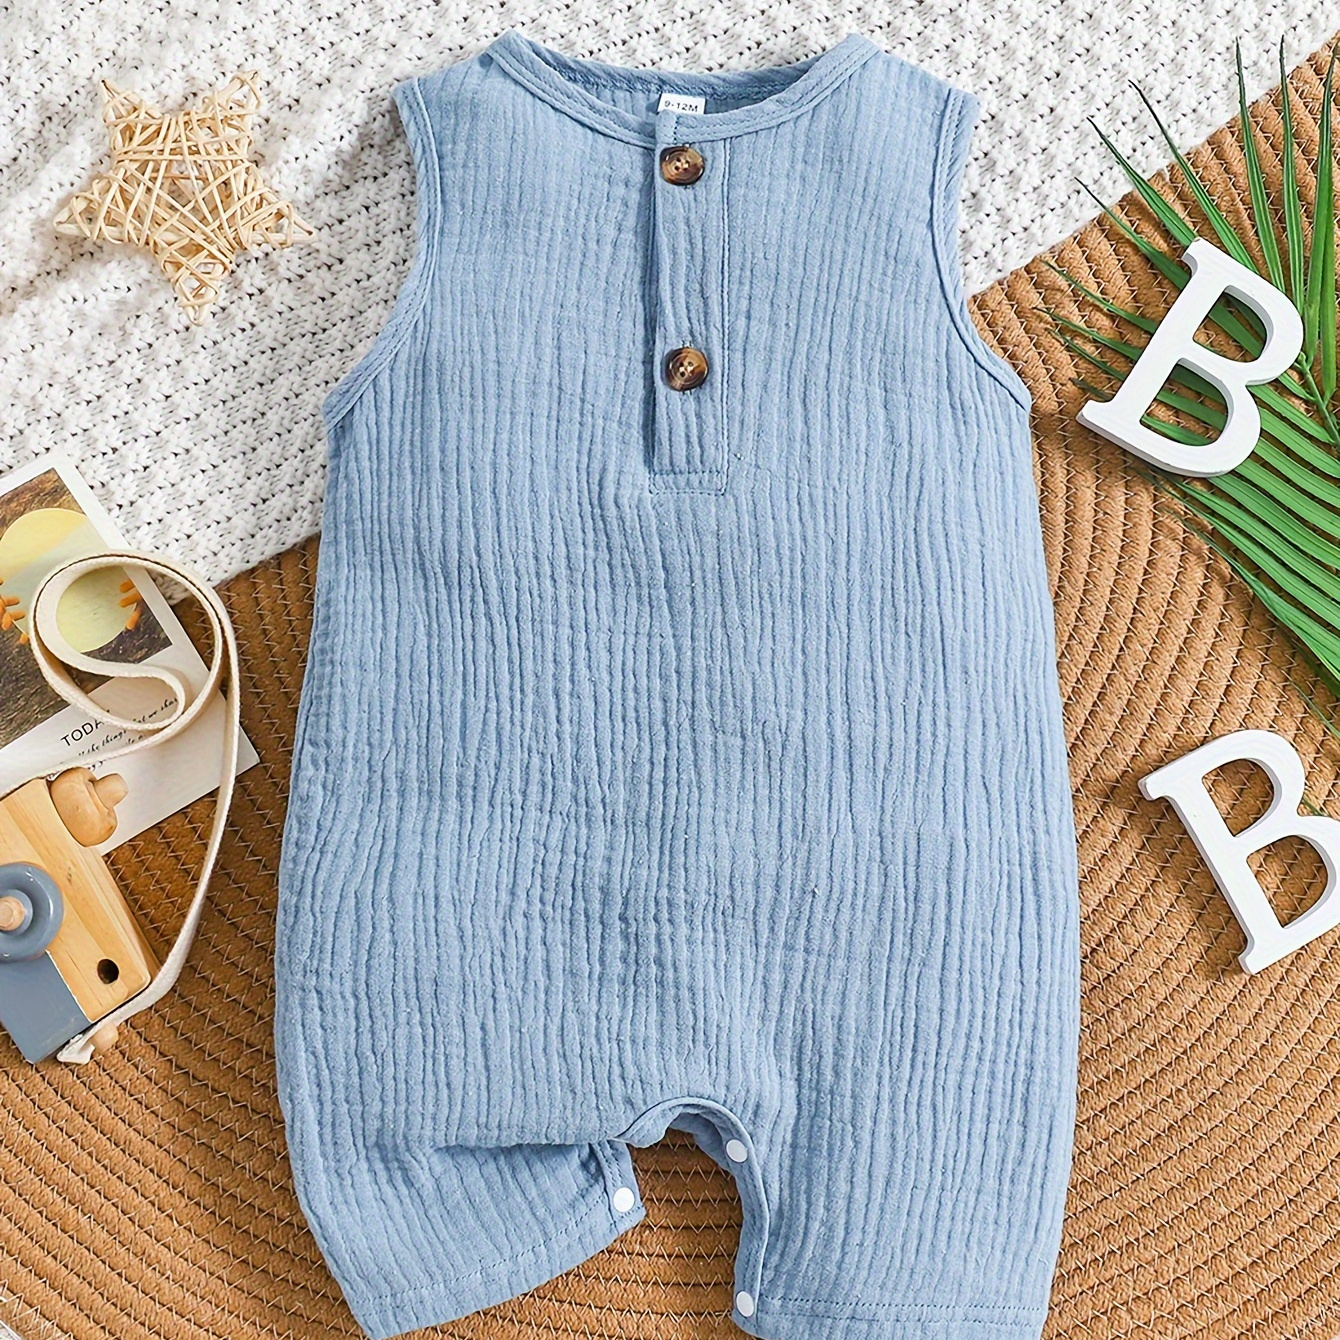 

Baby's Solid Color Comfy Cotton Sleeveless Romper, Toddler & Infant Boy's Muslin Bodysuit For Spring Summer